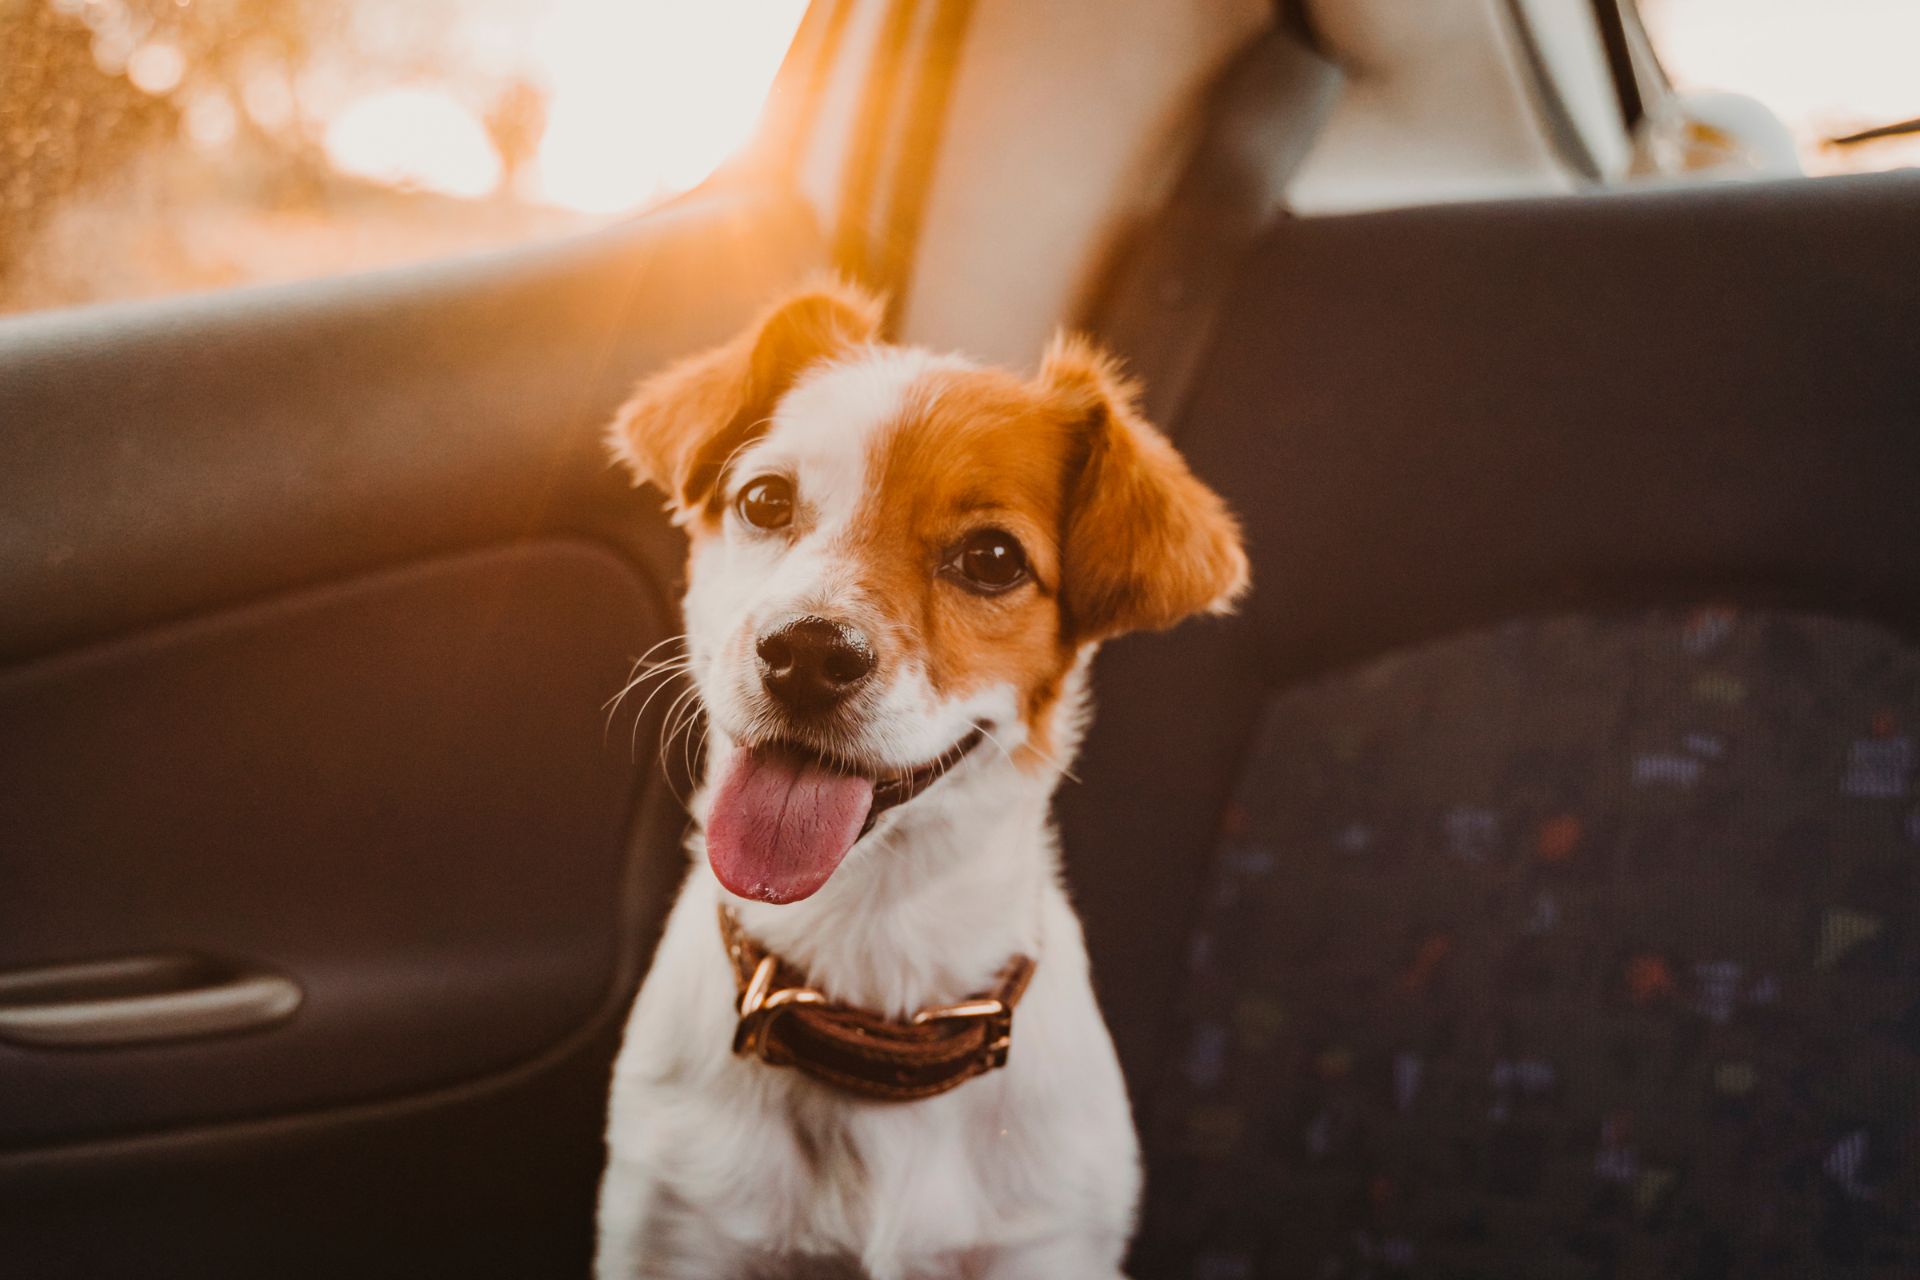 Jack Russell Dog in a Car